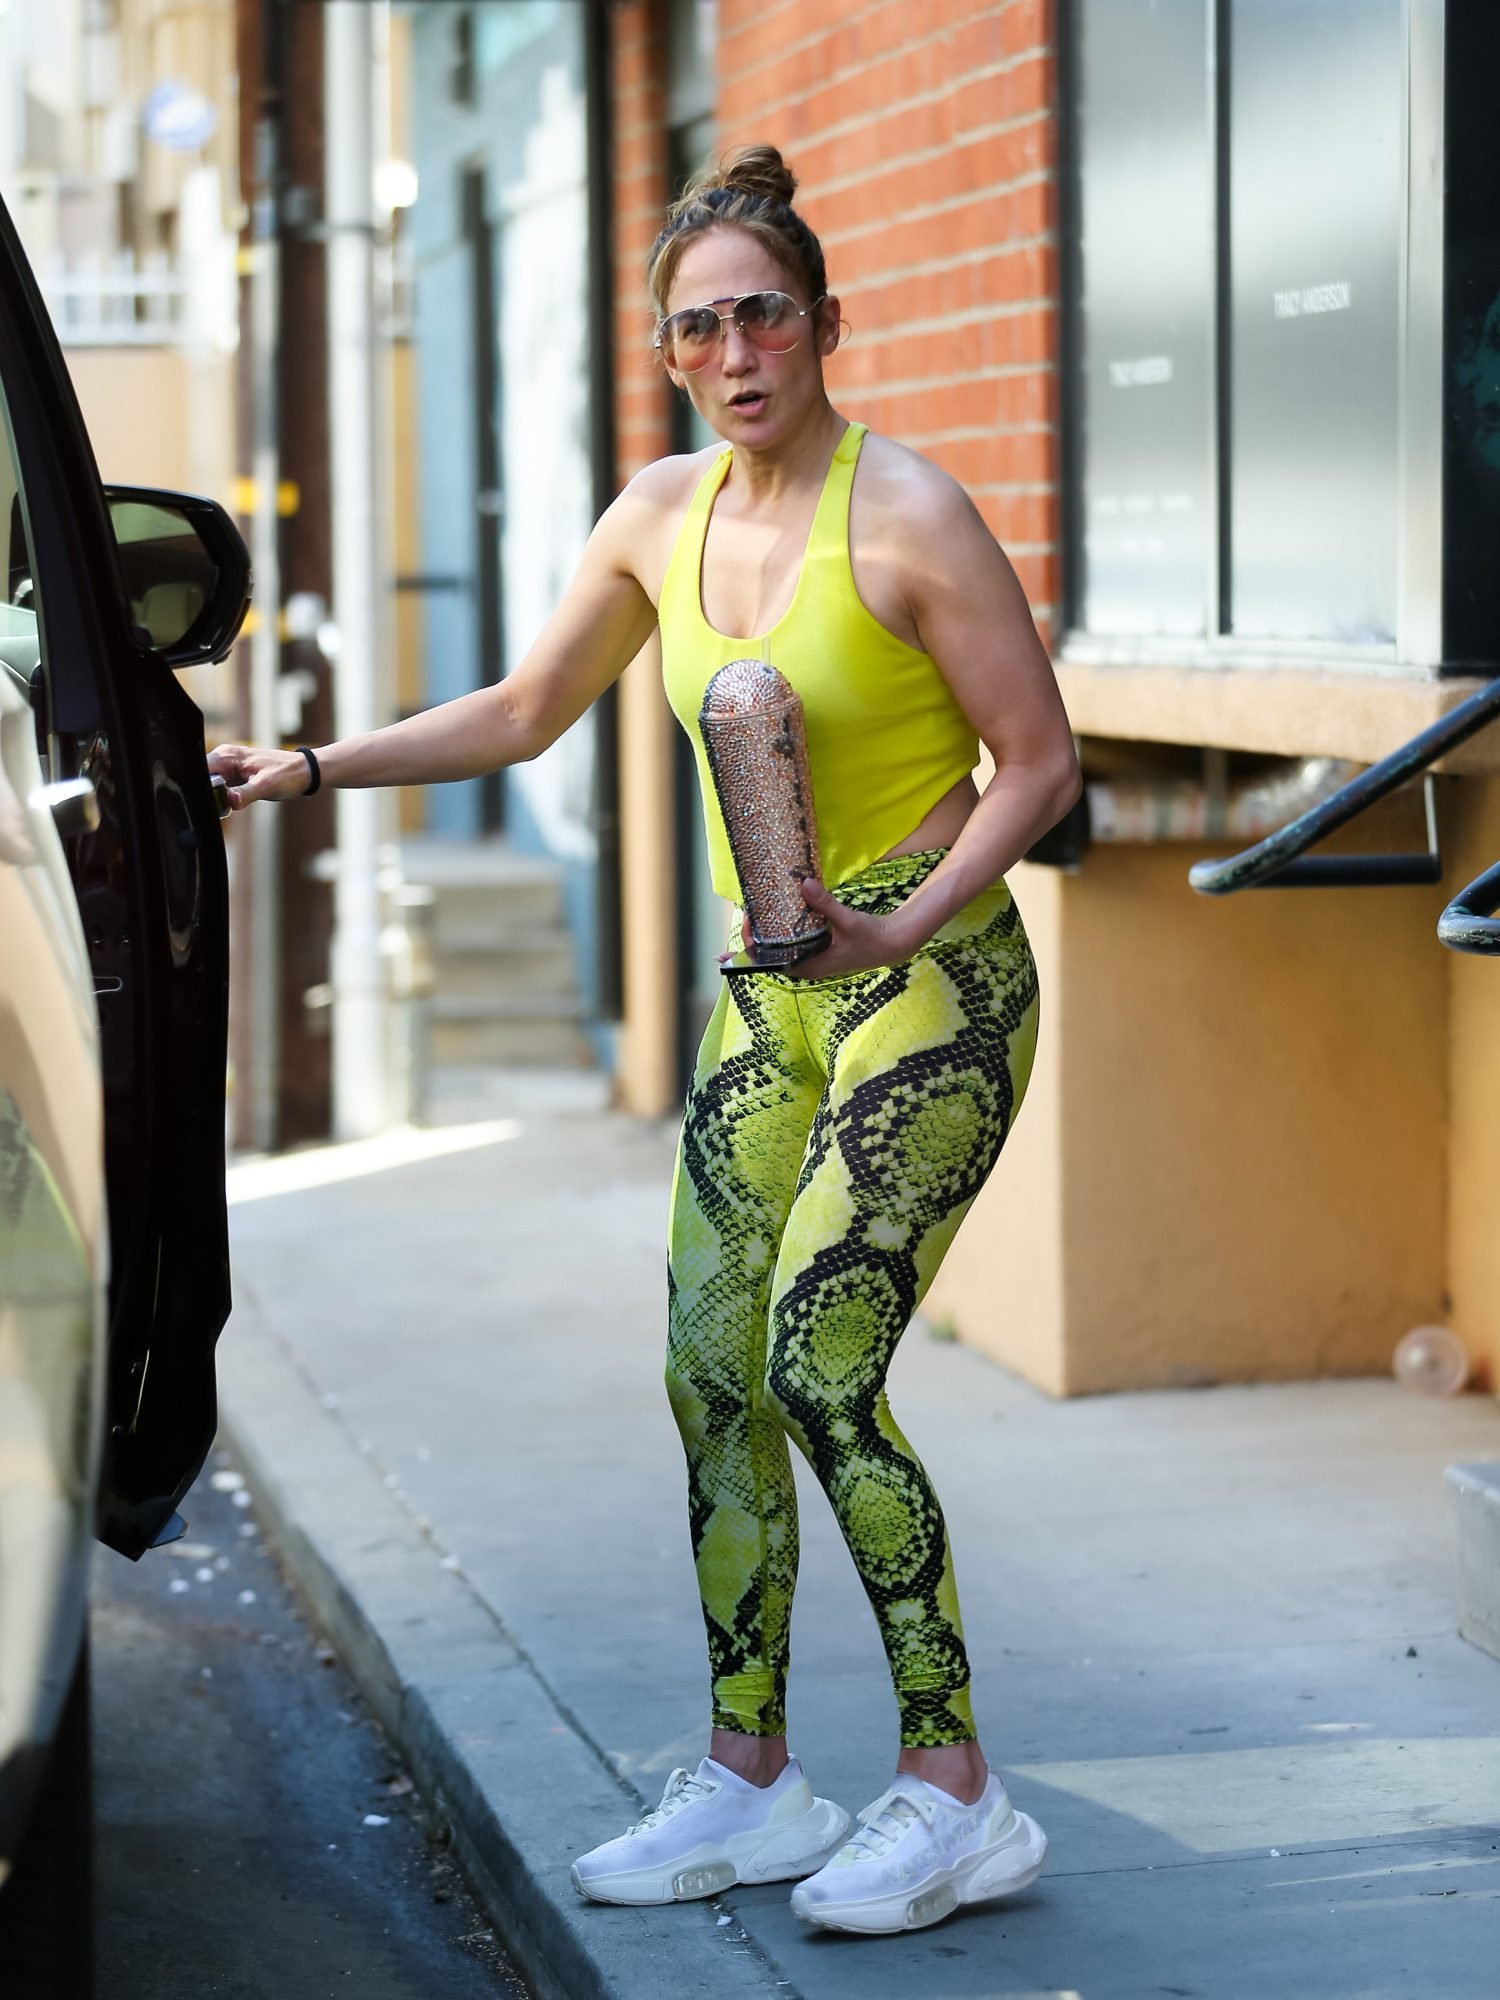 As the paps told her to have a good day, J.Lo can be heard yelling, 